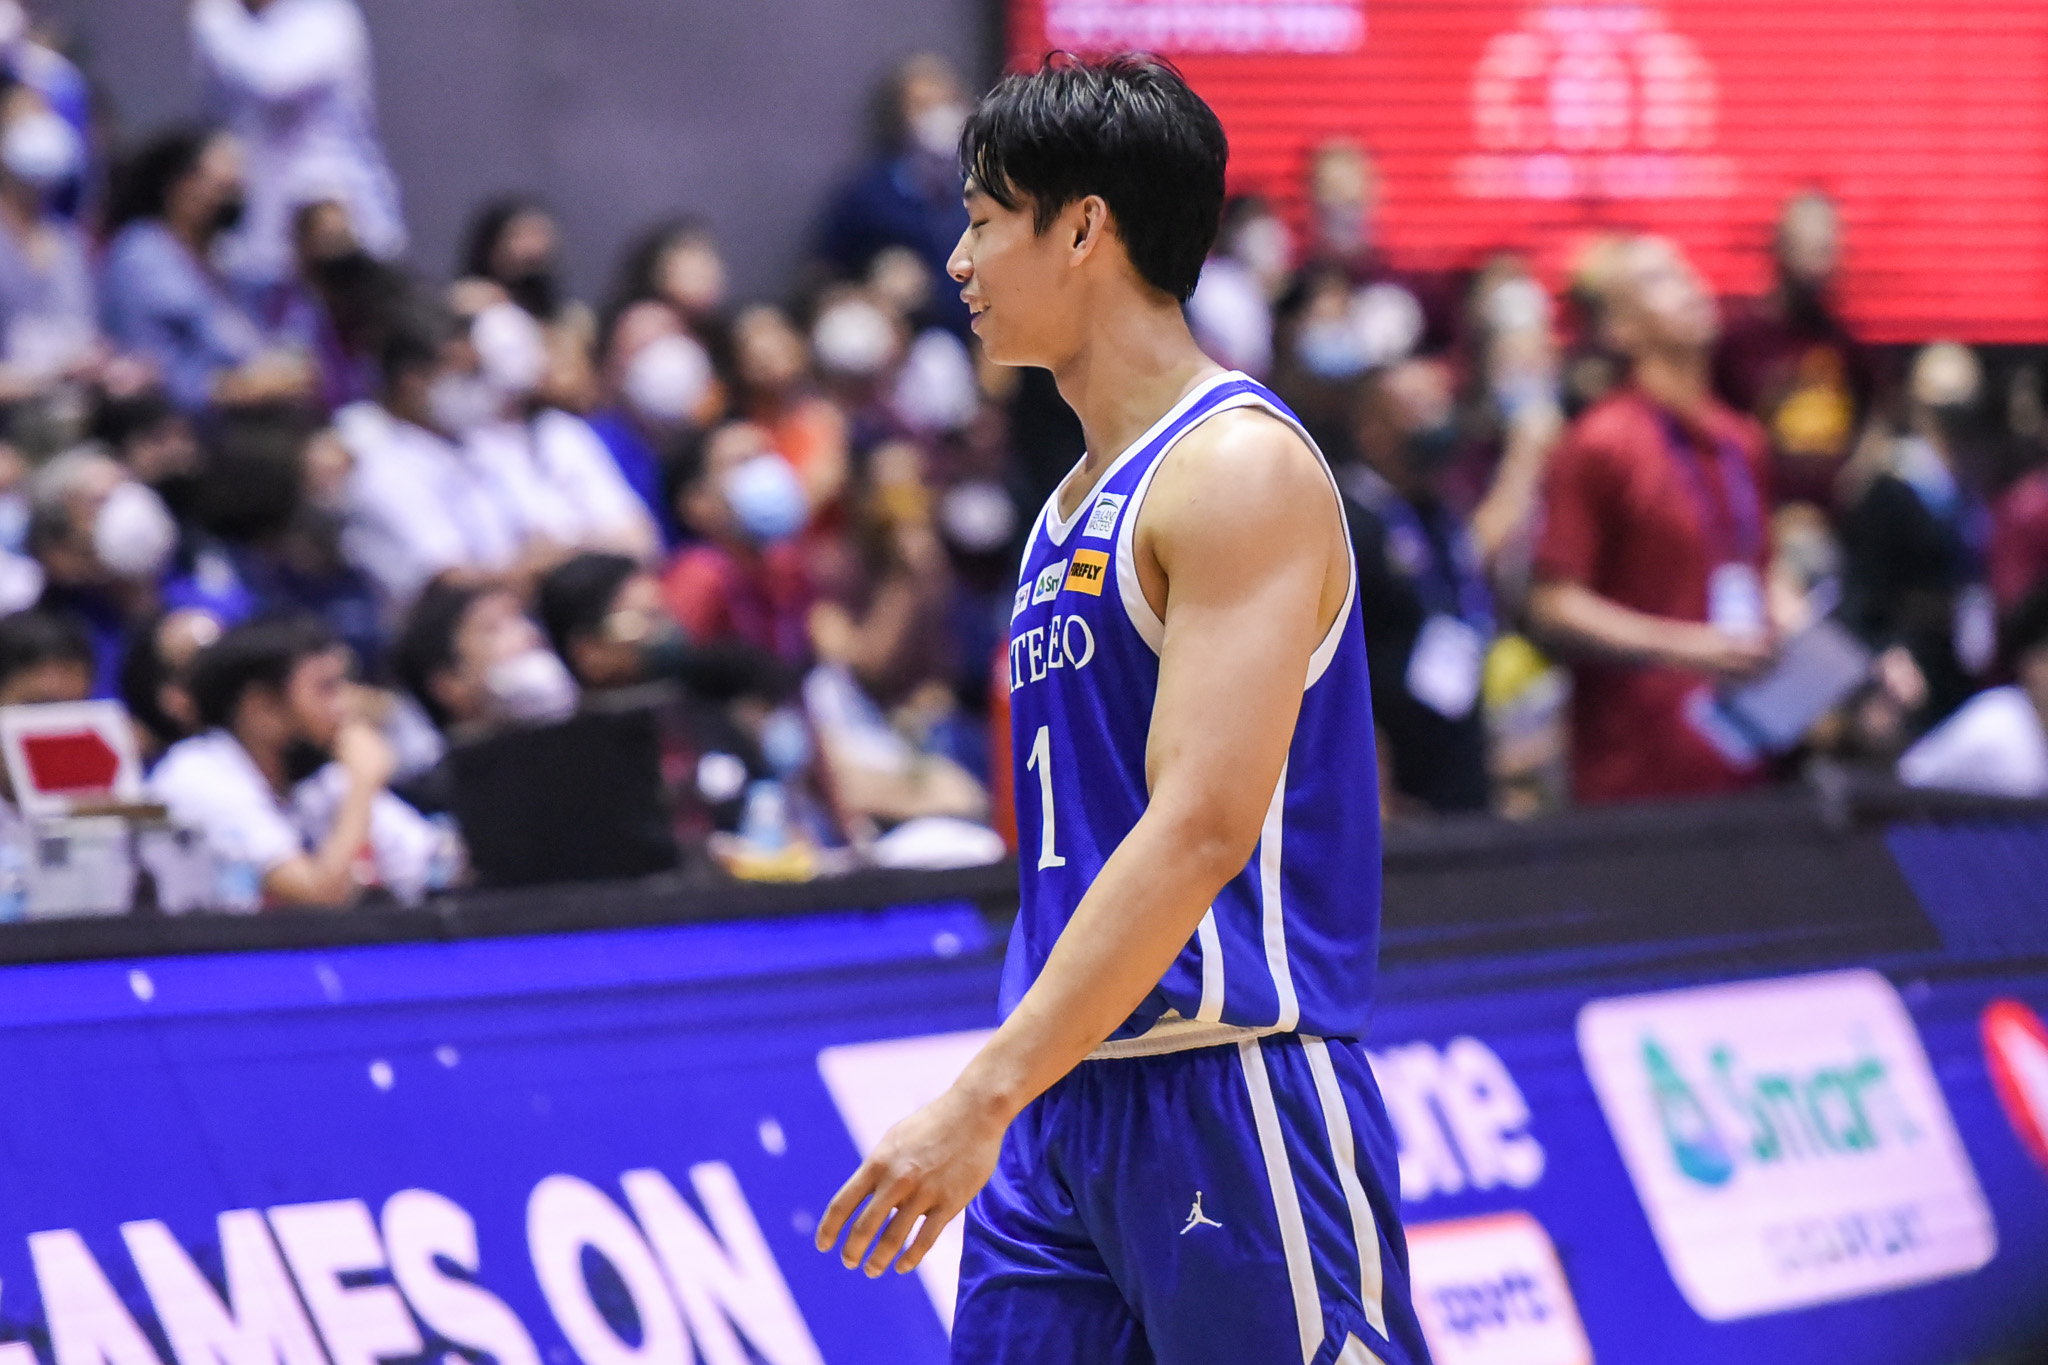 UAAP-85-MBB-ADMU-vs.-UP-Dave-Ildefonso-9317 Ildefonso, Galinato share praises for each other after heated exchange ADMU Basketball News UAAP UP  - philippine sports news